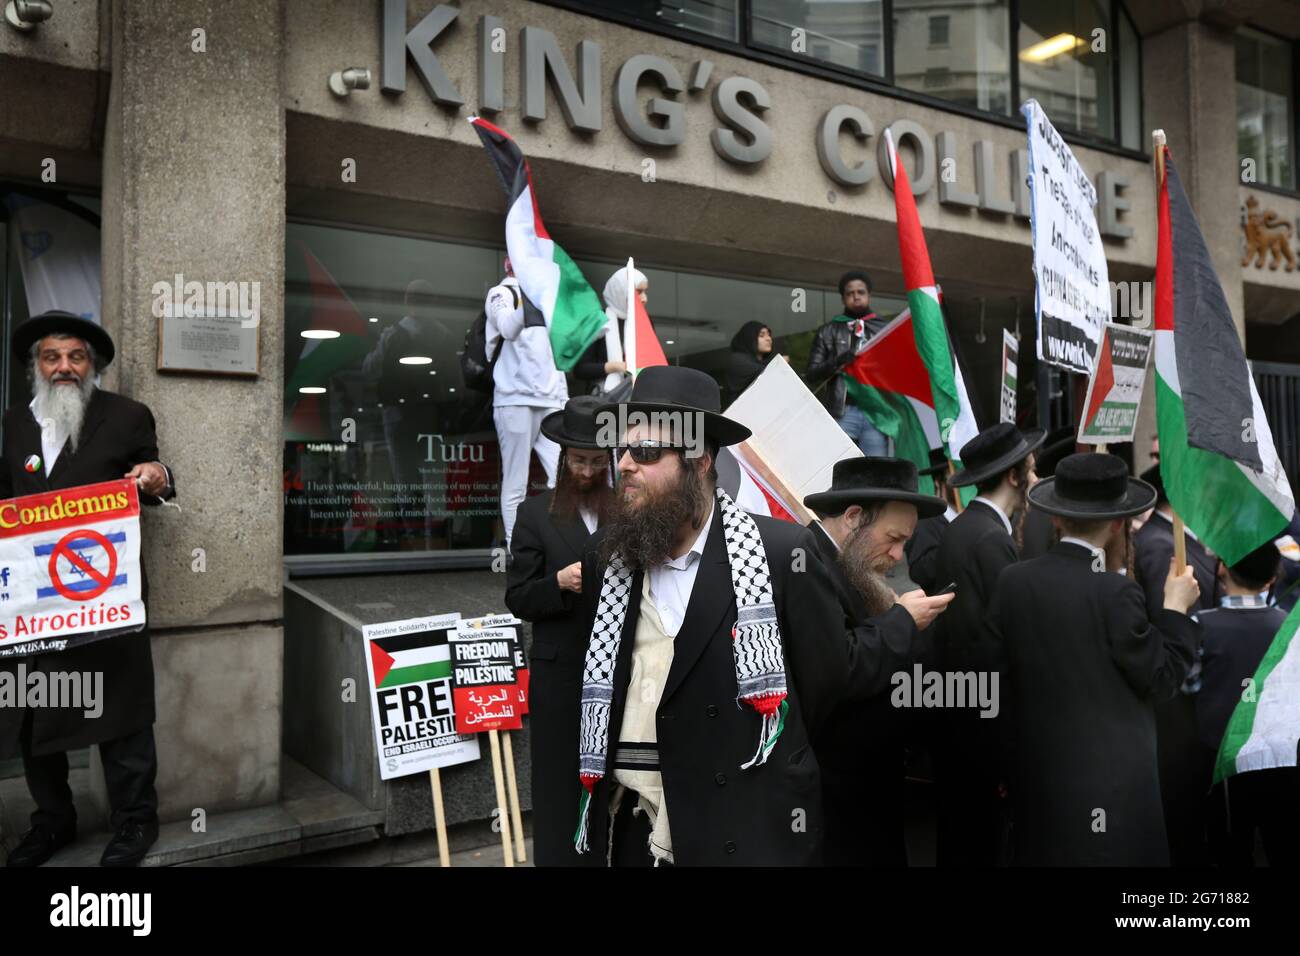 London, UK. 09th July, 2021. Protesters from the orthodox Jewish anti-Zionist group the Neturei Karta hold Palestinian flags and placards outside King's College during a protest.Students and other protesters go on a tour of London Universities to demand a boycott for all Israeli academic and cultural institutions in solidarity with the struggle to end Israel's occupation, colonisation and system of apartheid in Israel. Credit: SOPA Images Limited/Alamy Live News Stock Photo